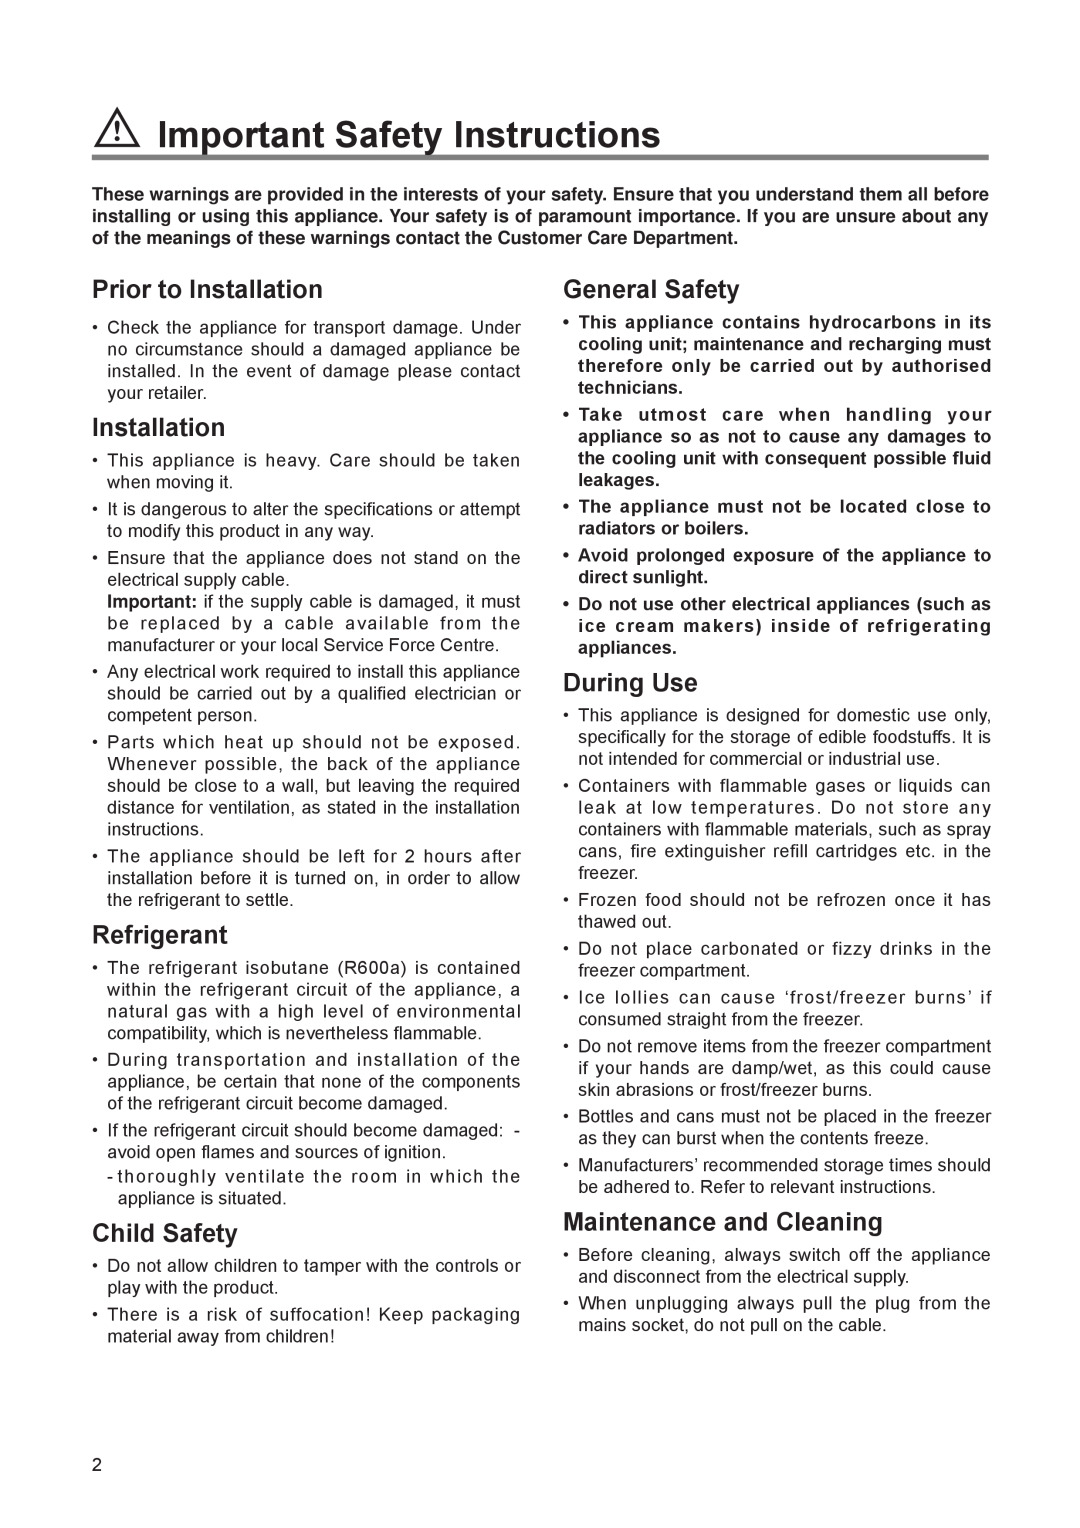 Electrolux EUN 1272 manual Important Safety Instructions, Prior to Installation, Refrigerant, General Safety, During Use 